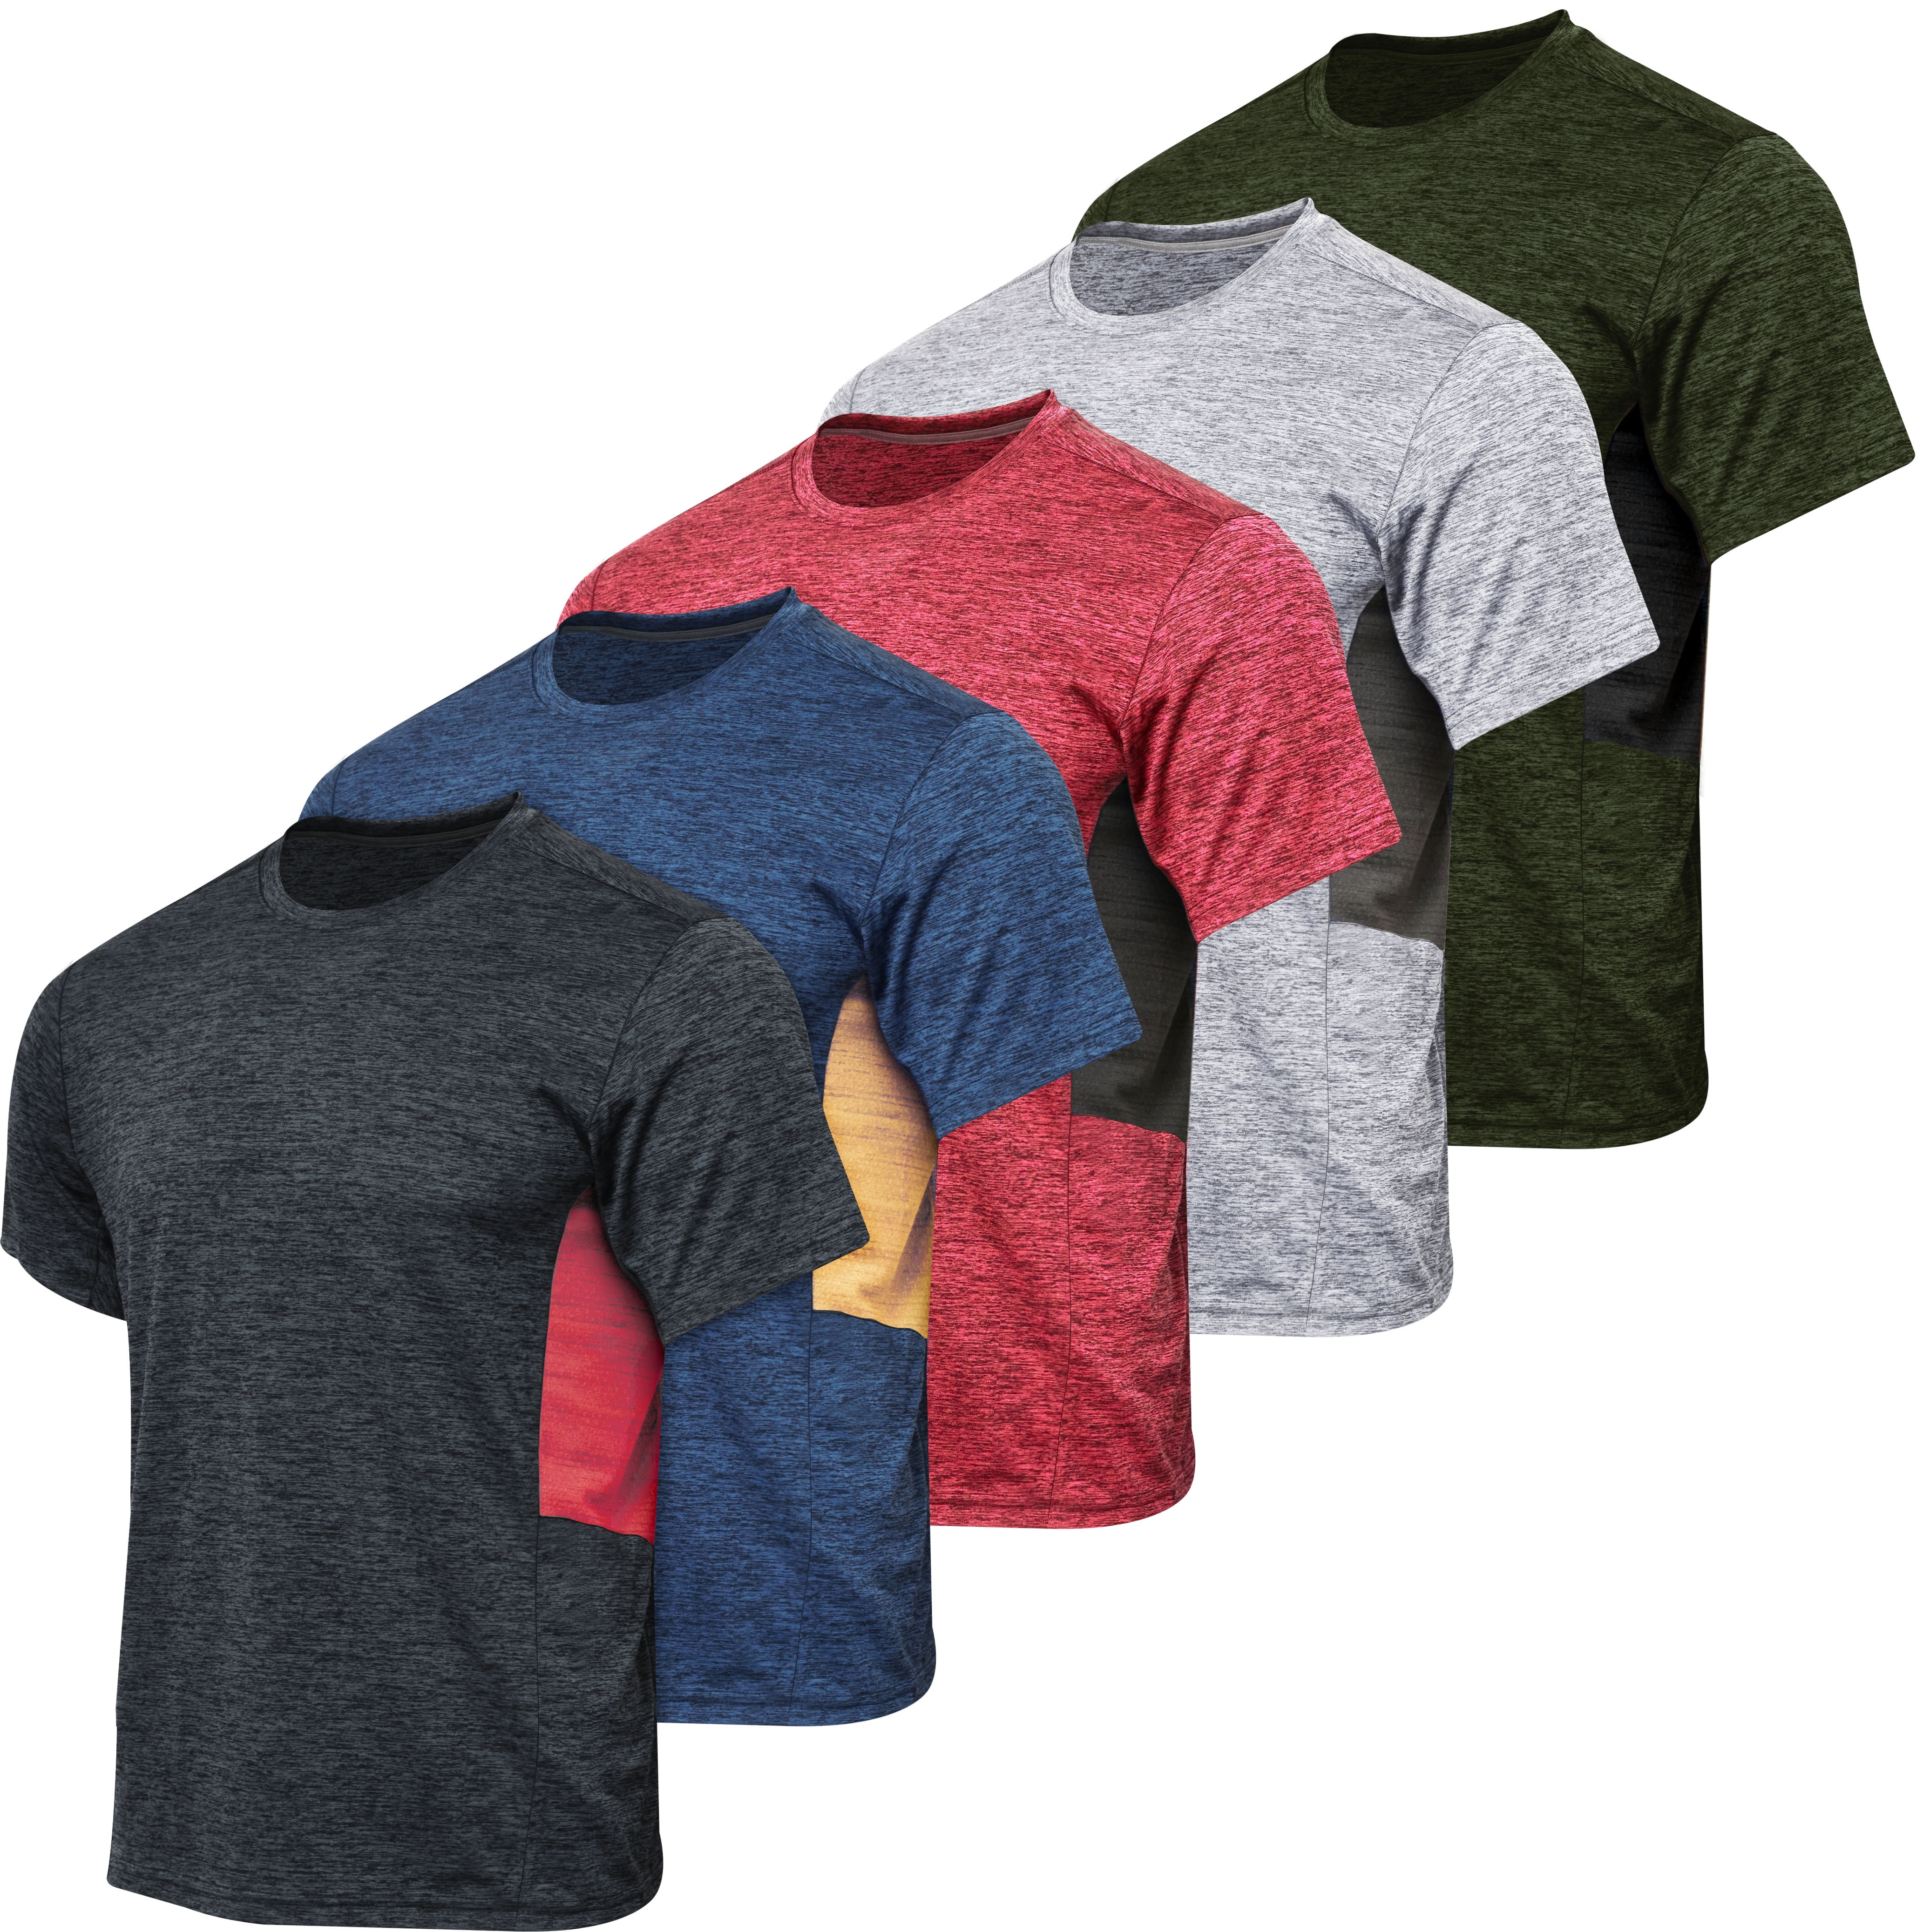 Boyoo Boy's 3 Pack Performance Dry-Fit T-Shirts Moisture Wicking Youth Breathable Active Athletic T Shirts 